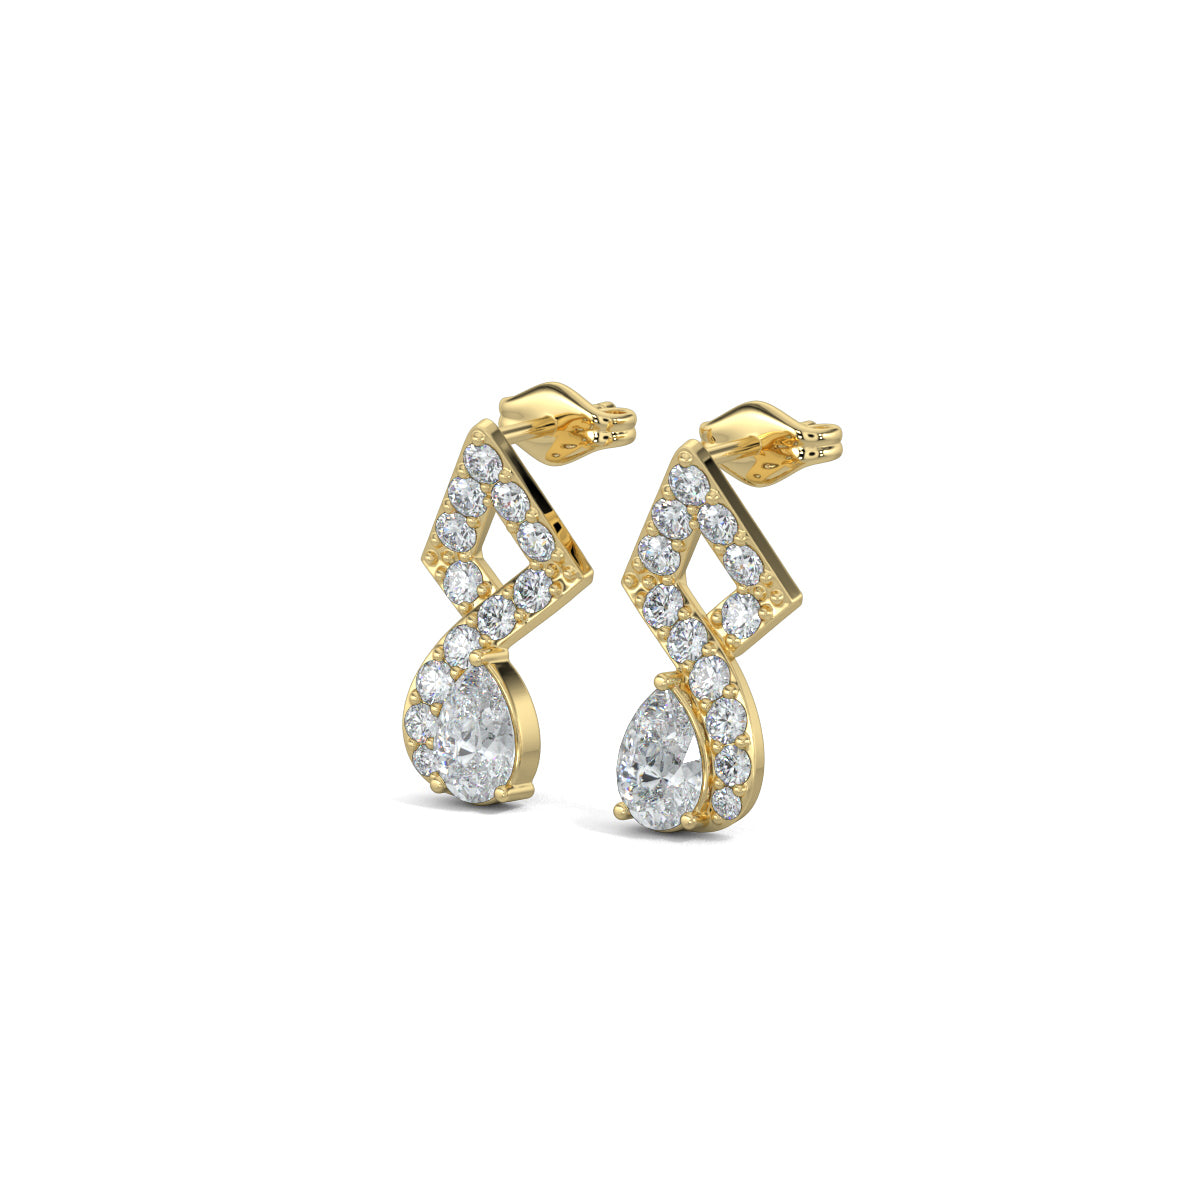 Yellow Gold, Diamond Earrings, Twisted Elegance earrings, diamond earrings, natural diamonds, lab-grown diamonds, pear-cut diamonds, pave setting, mid-length earrings, traditional design, contemporary elegance